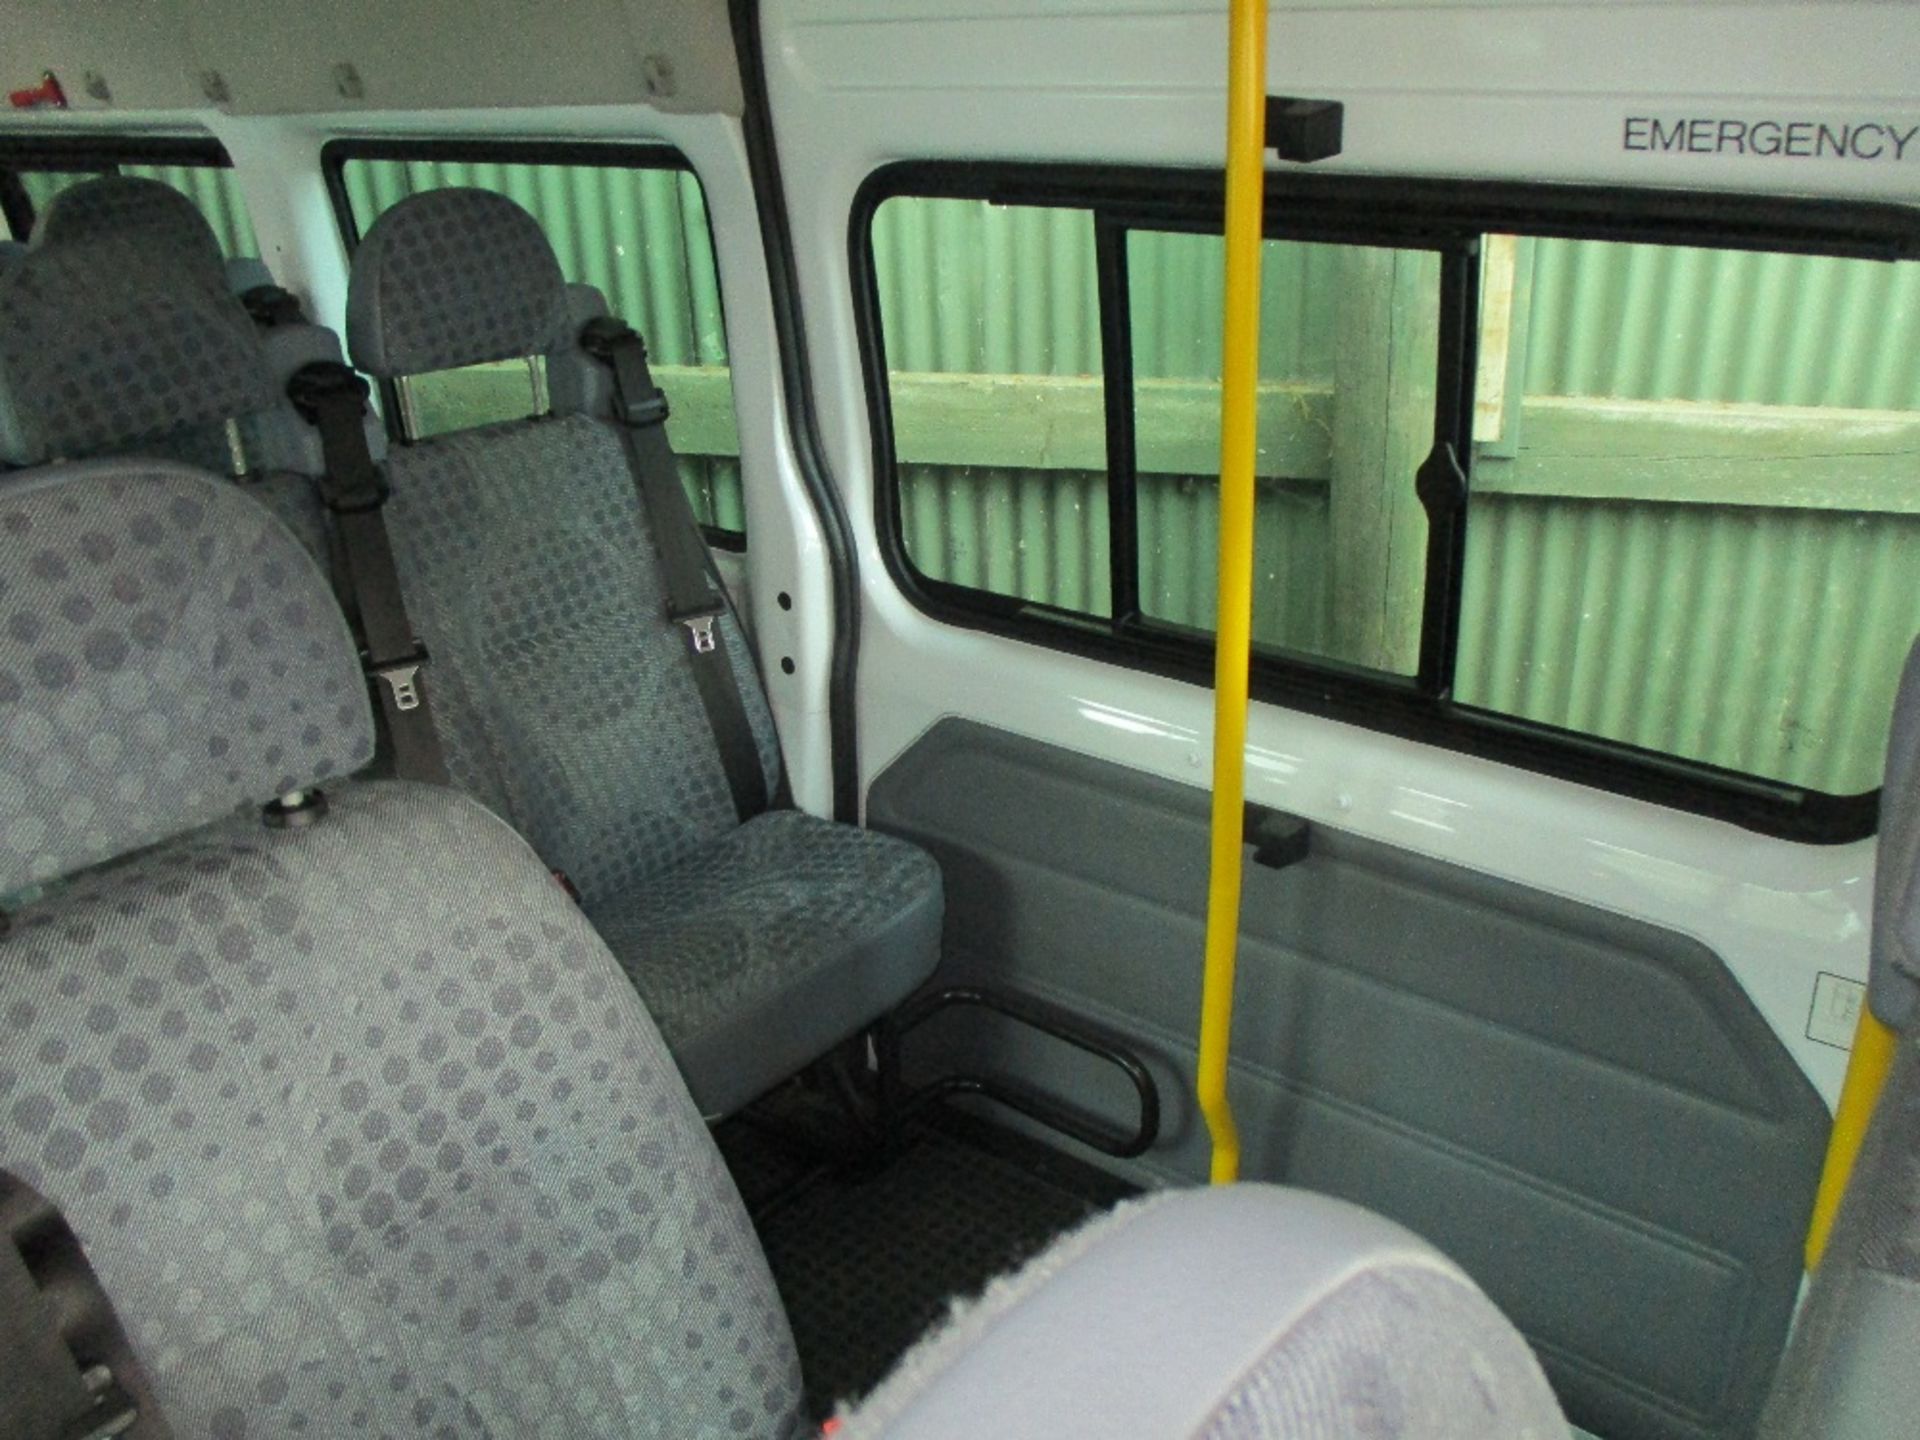 Ford Transit mini bus, 17 seats in total, REG:BD63 OEF previously damaged and repaired, 34,680rec. - Image 4 of 7